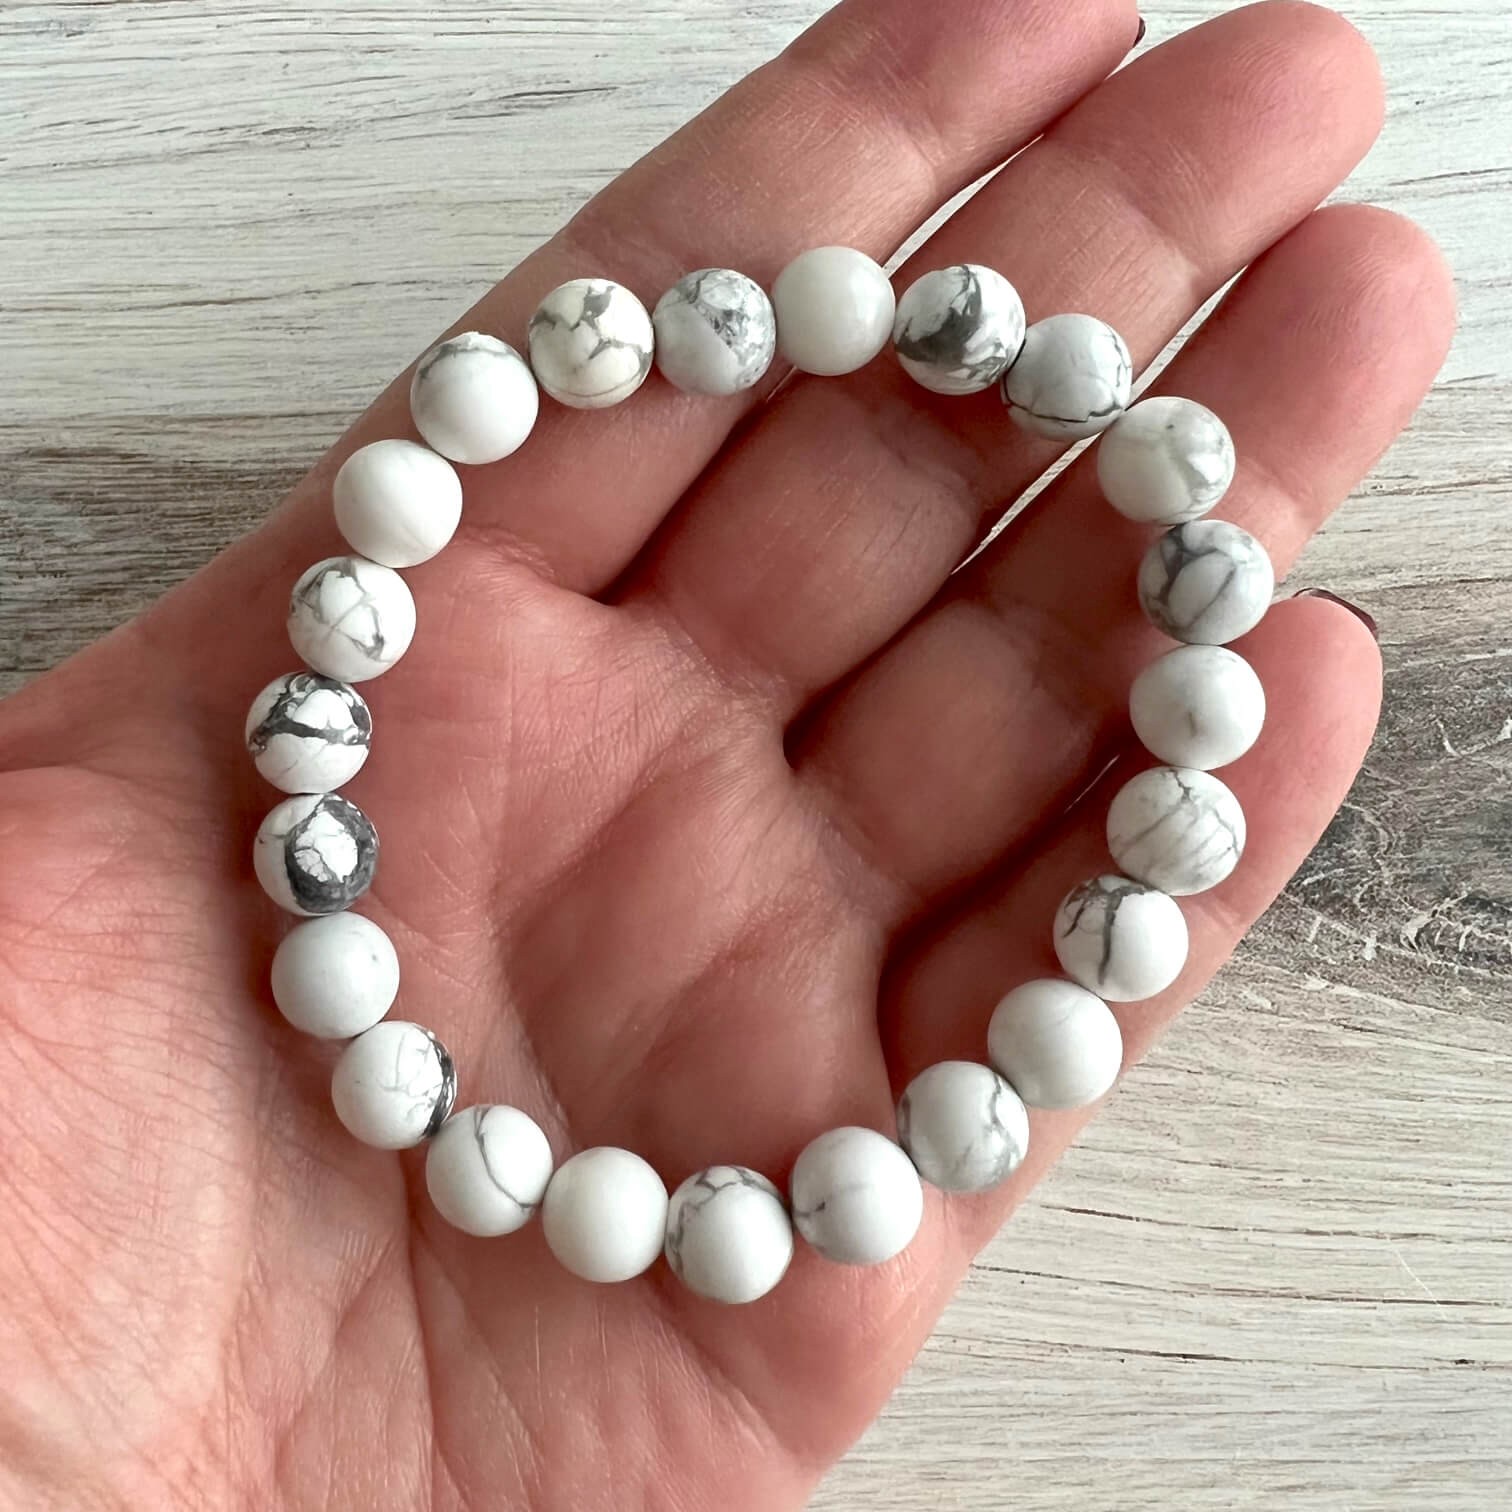 Buy Howlite Bracelet Online - Know Price and Benefits — My Soul Mantra